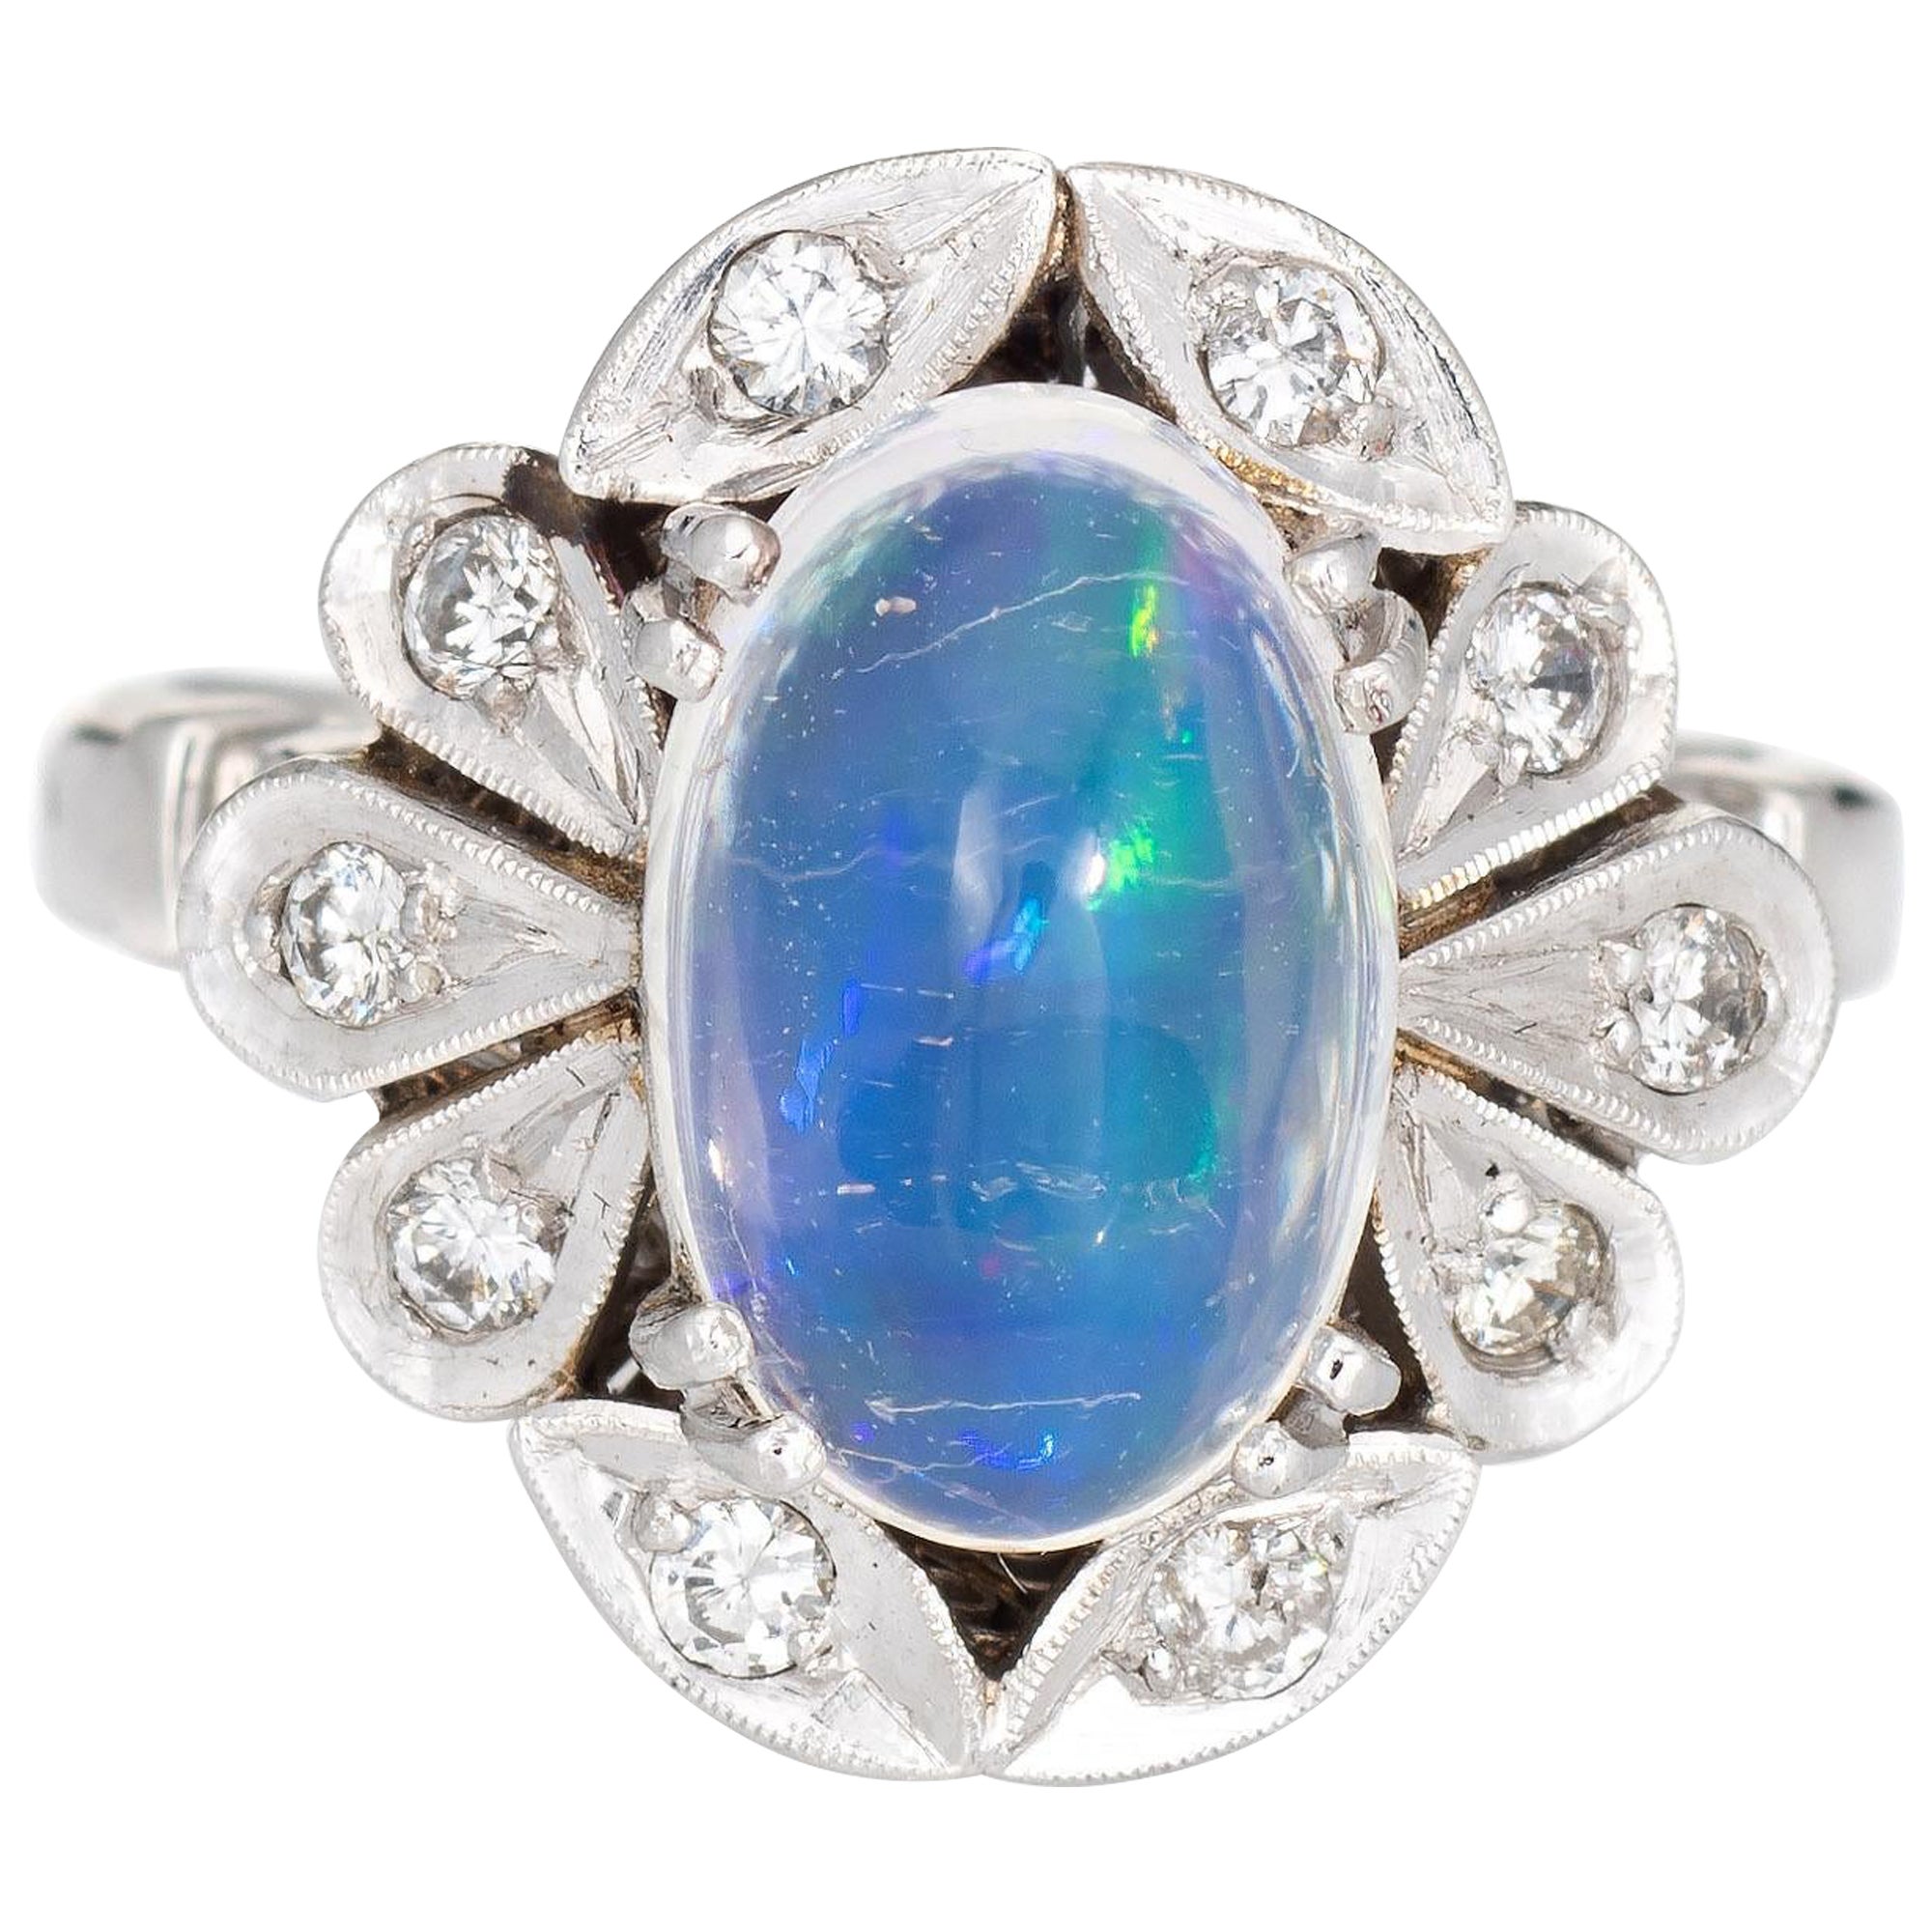 3.15ct Natural Jelly Opal Diamond Ring Platinum Estate Fine Jewelry For Sale